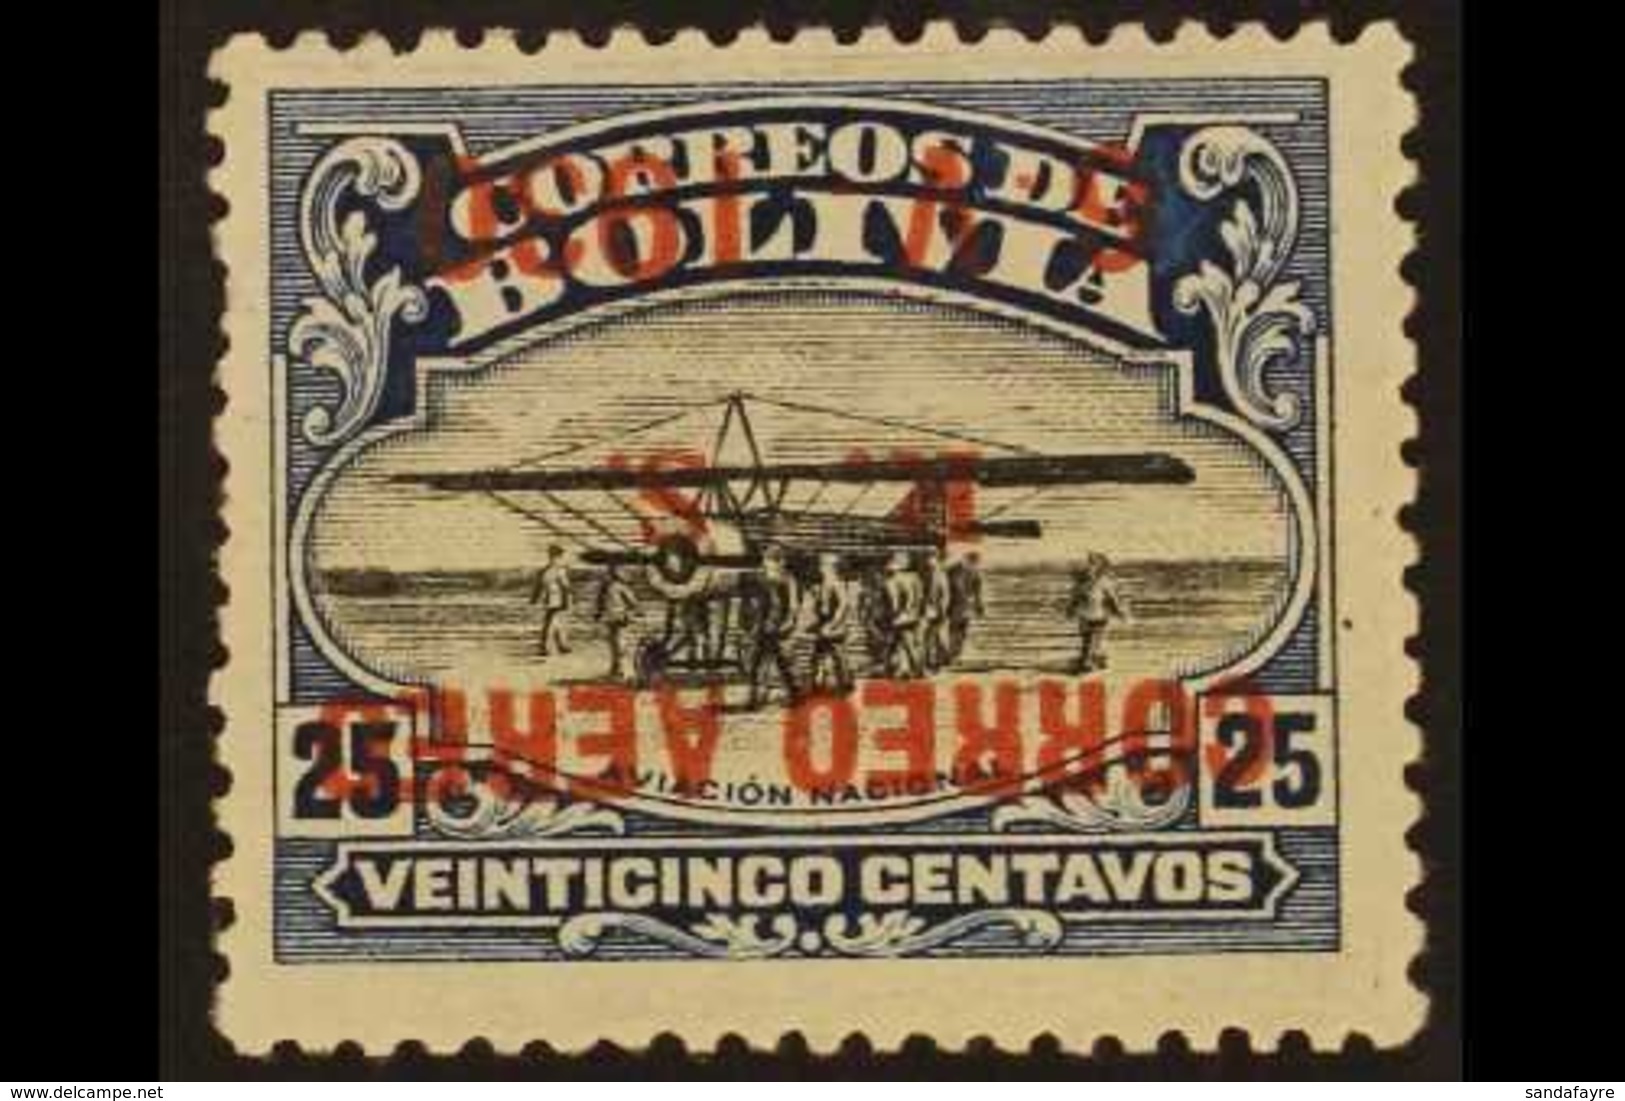 1930 25c Black And Blue With AIR POST OVERPRINT INVERTED, SG 232 Variety (Sanabria 25a), Very Fine Mint, Couple Of Short - Bolivia